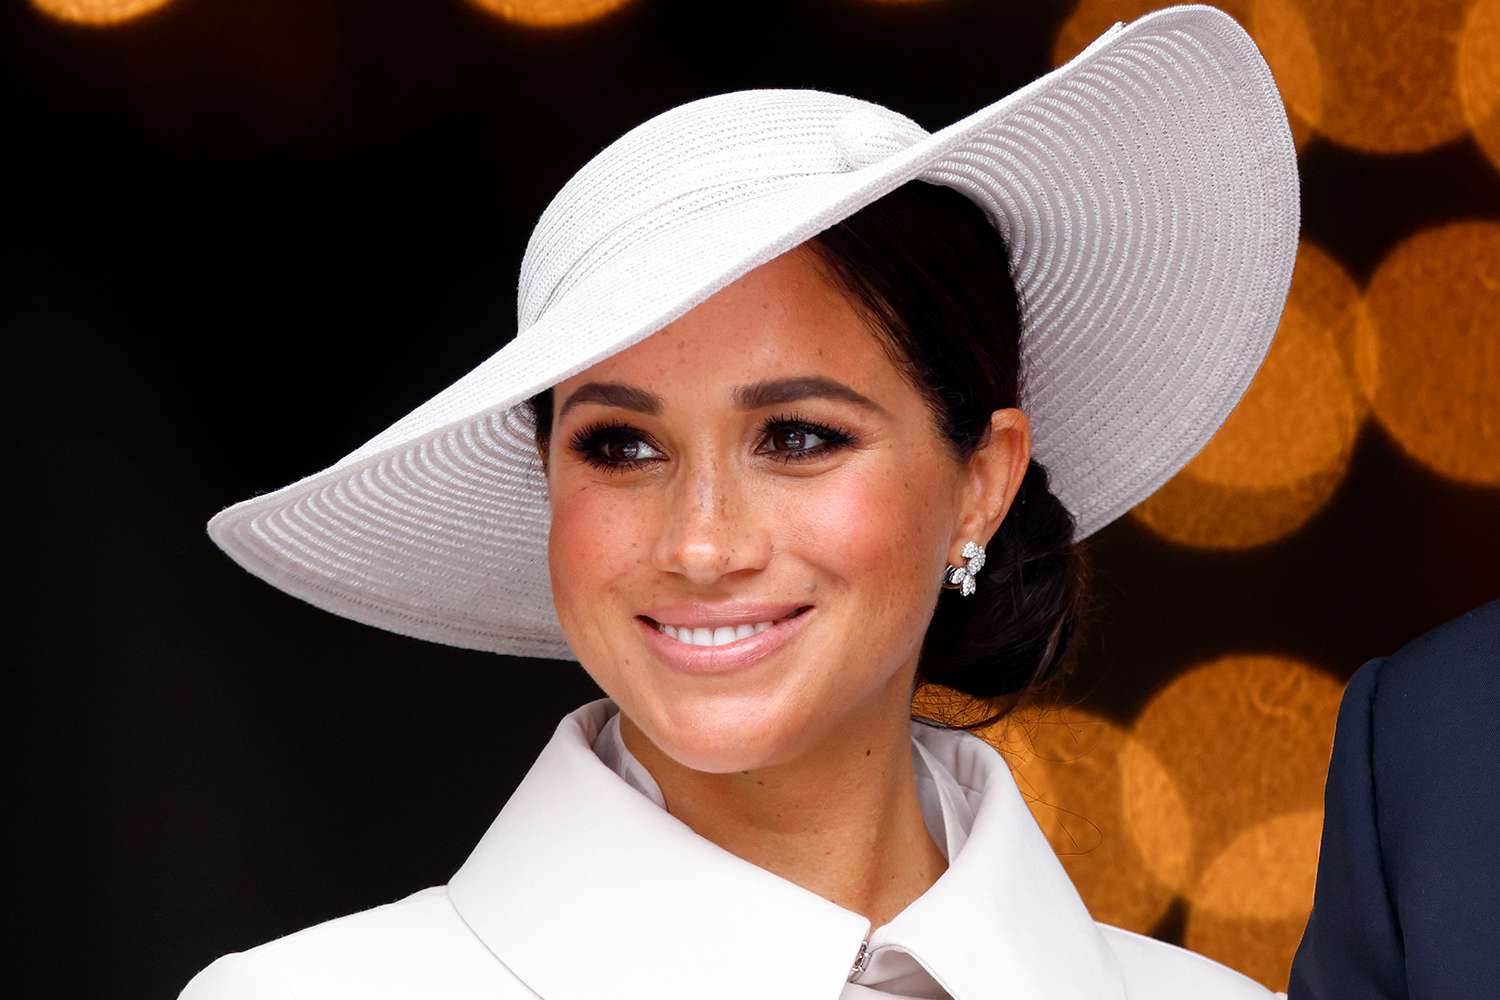 Meghan Markle Celebrated Daughter Lilibet's First Birthday in the Summer Pants Everyone Should Own